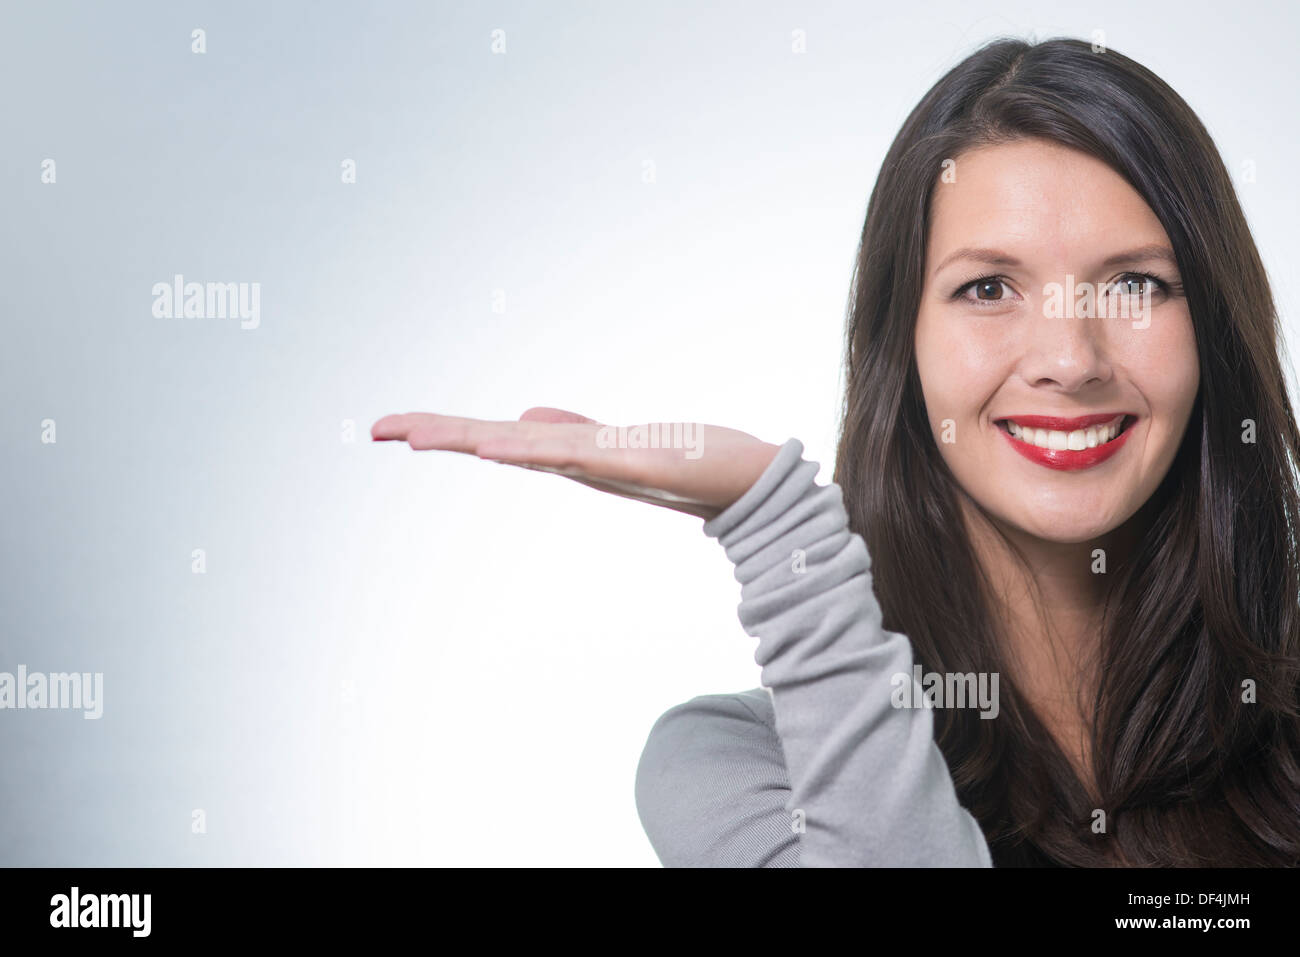 Beautiful young woman with a lovely friendly smile standing with an outstretched empty palm for your product placement pointing Stock Photo